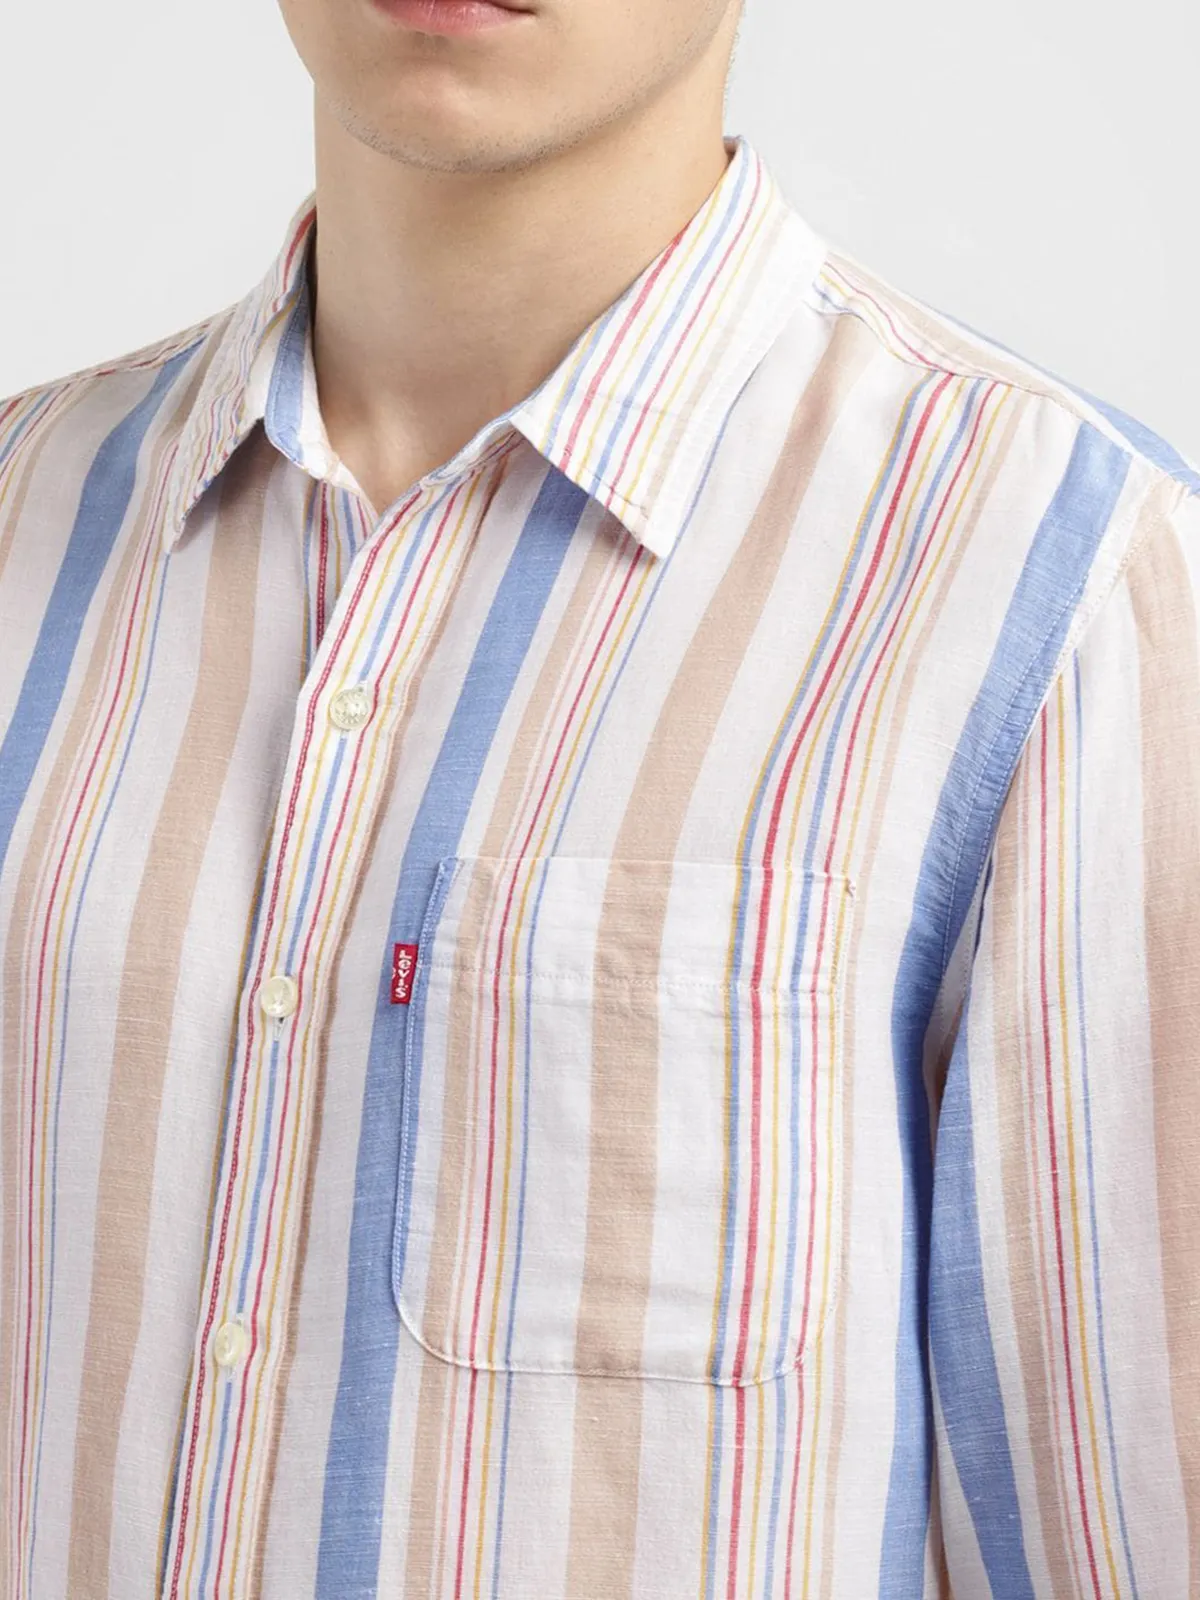 LEVIS white and blue stripe casual shirt